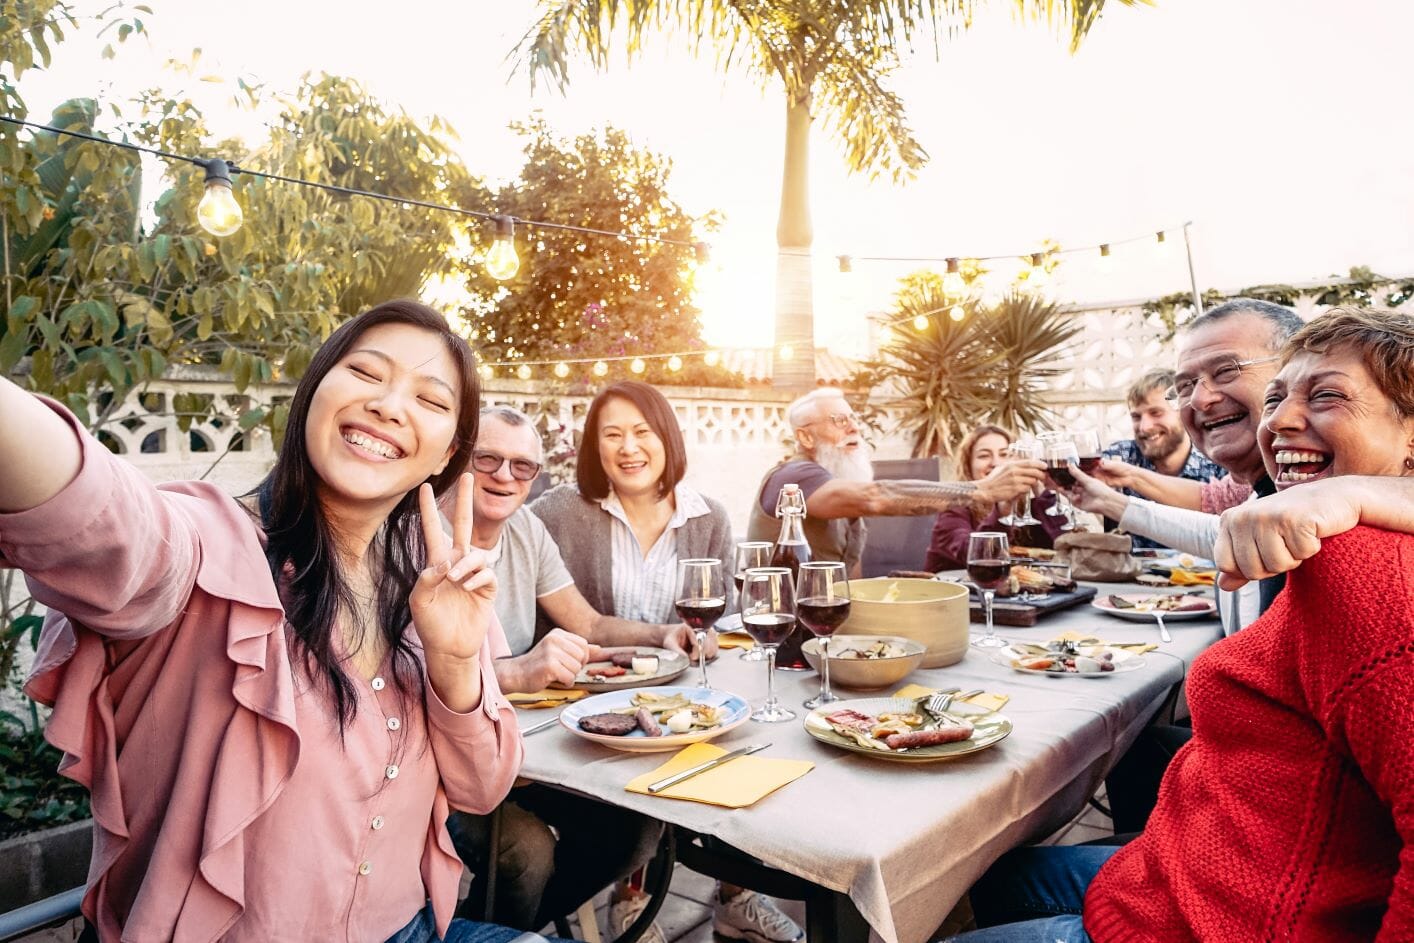 international students and workers enjoying an outdoor dinner party